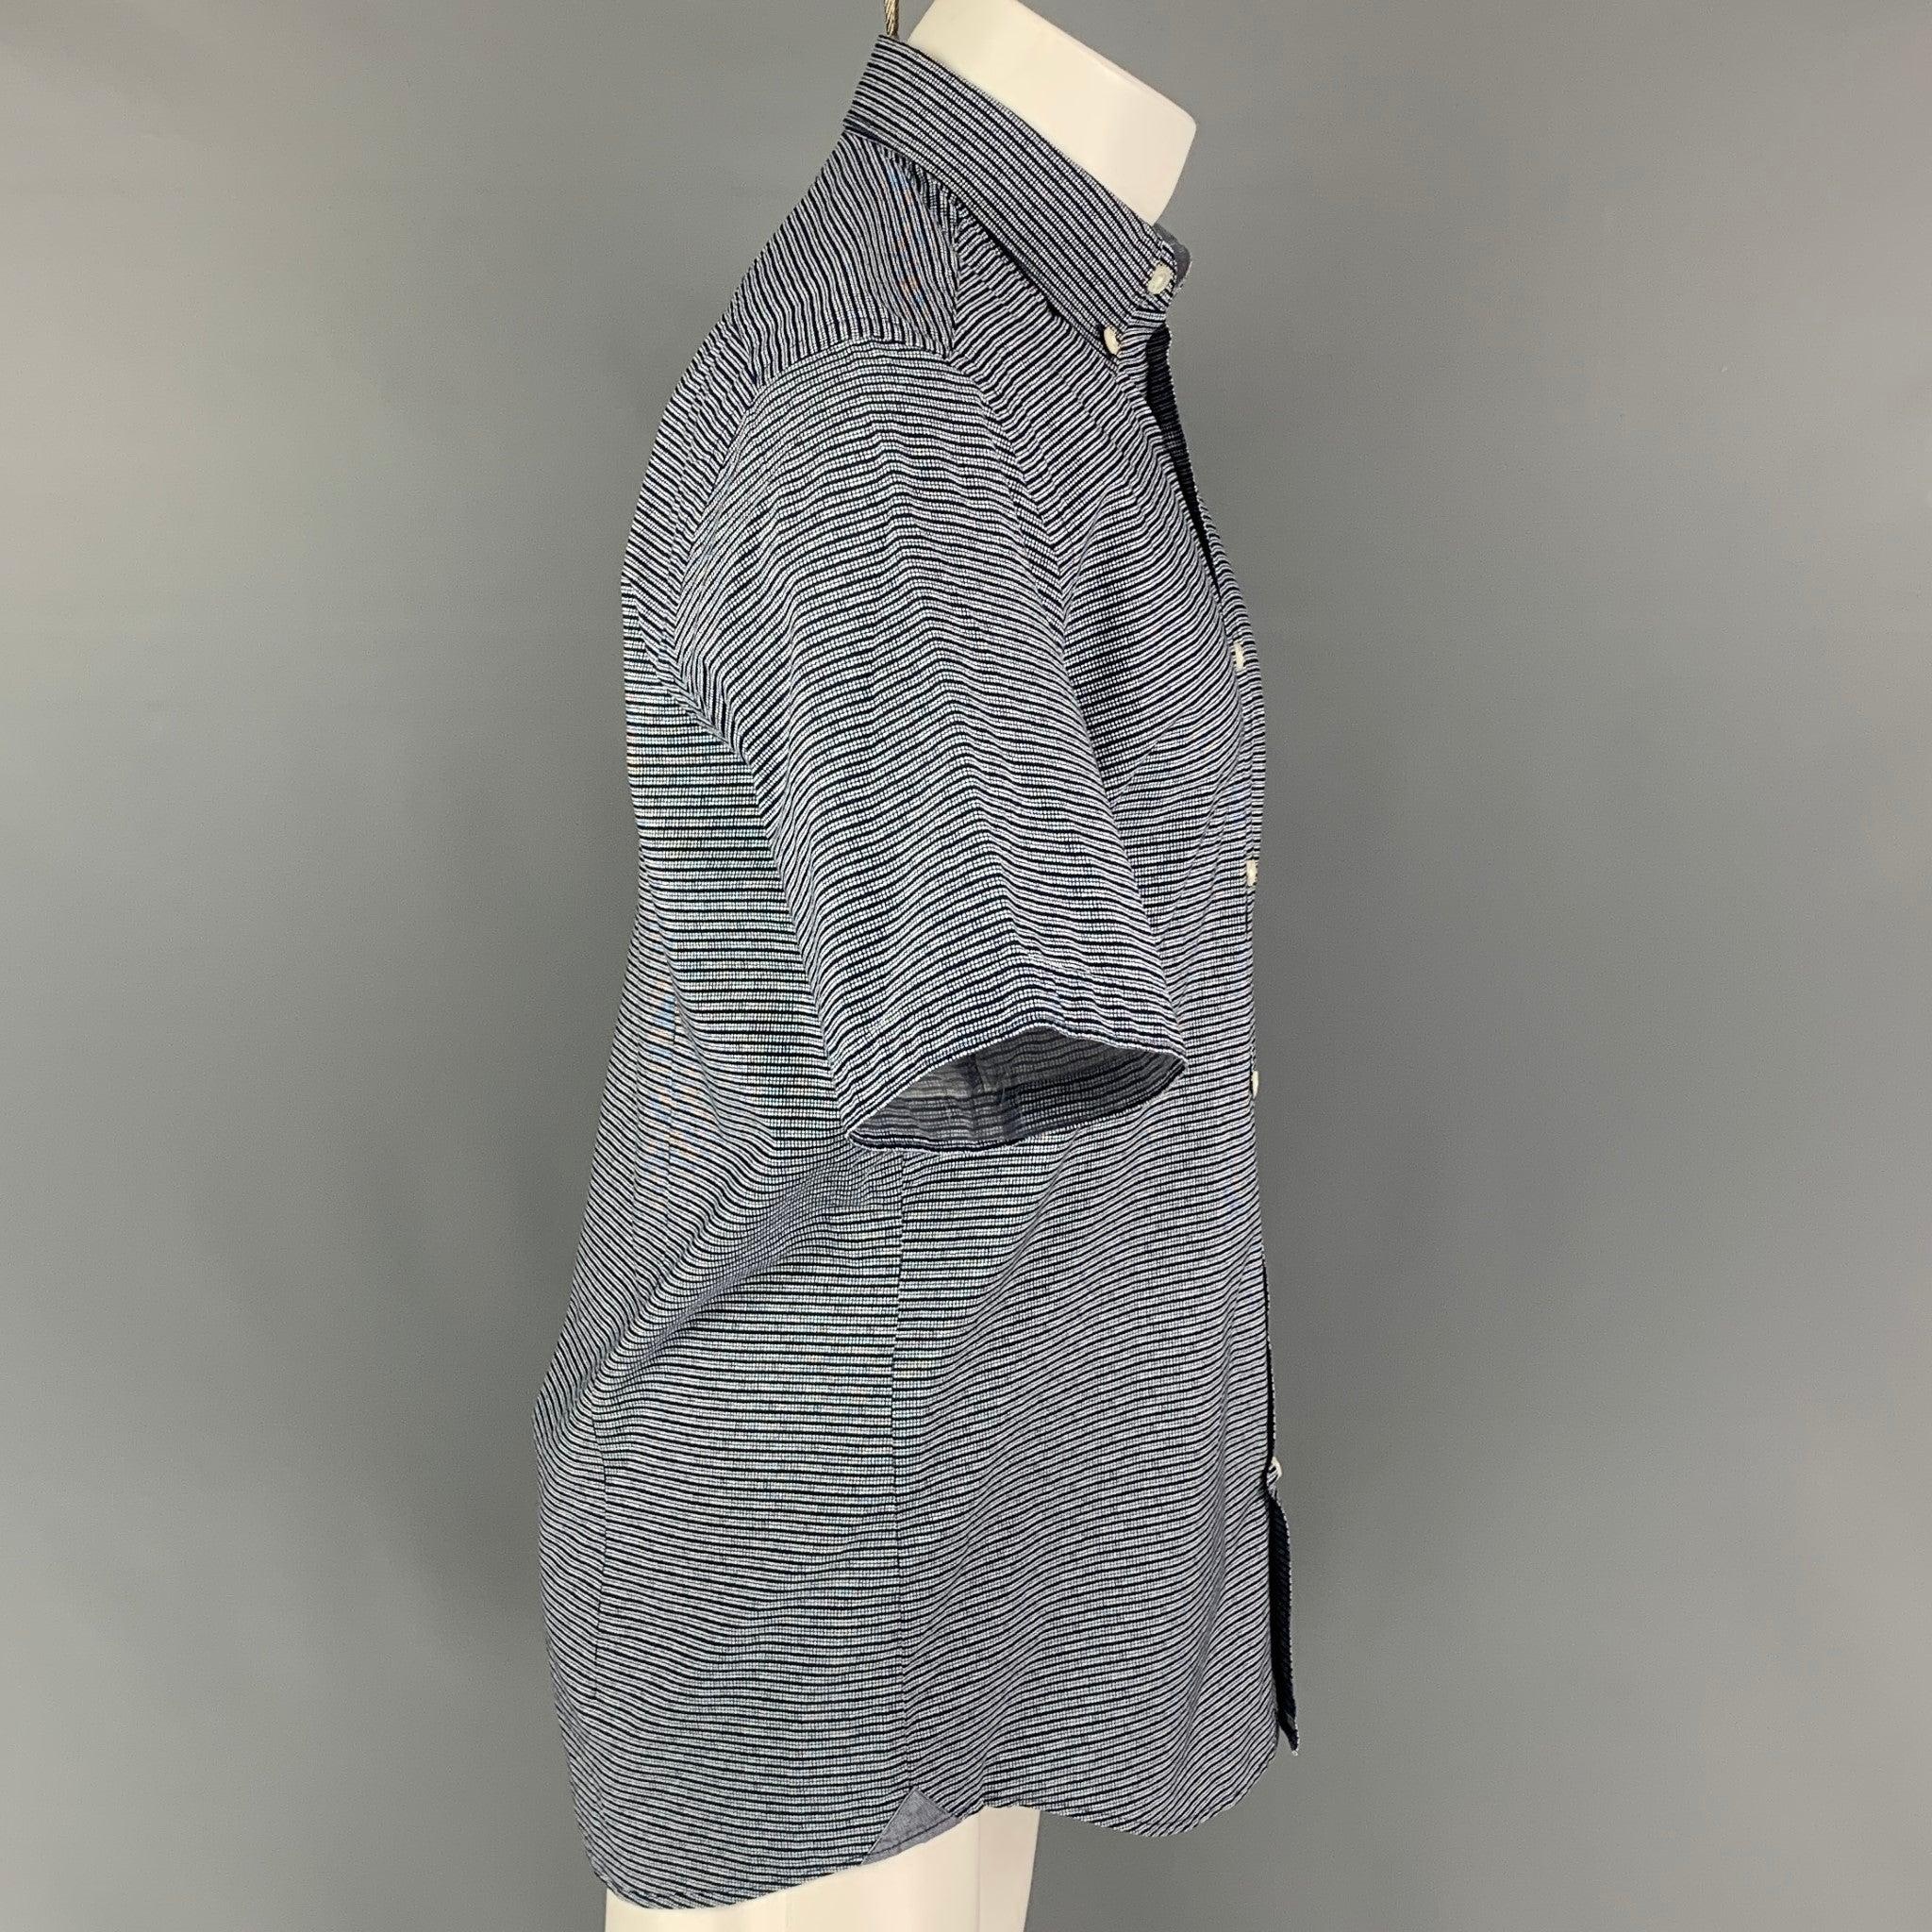 BOSS by HUGO BOSS short sleeve shirt comes in a navy & white stripe cotton featuring a regular fit, button down collar, and a button up closure.
Very Good
Pre-Owned Condition. 

Marked:   M  

Measurements: 
 
Shoulder: 17.5 inches  Chest: 40 inches